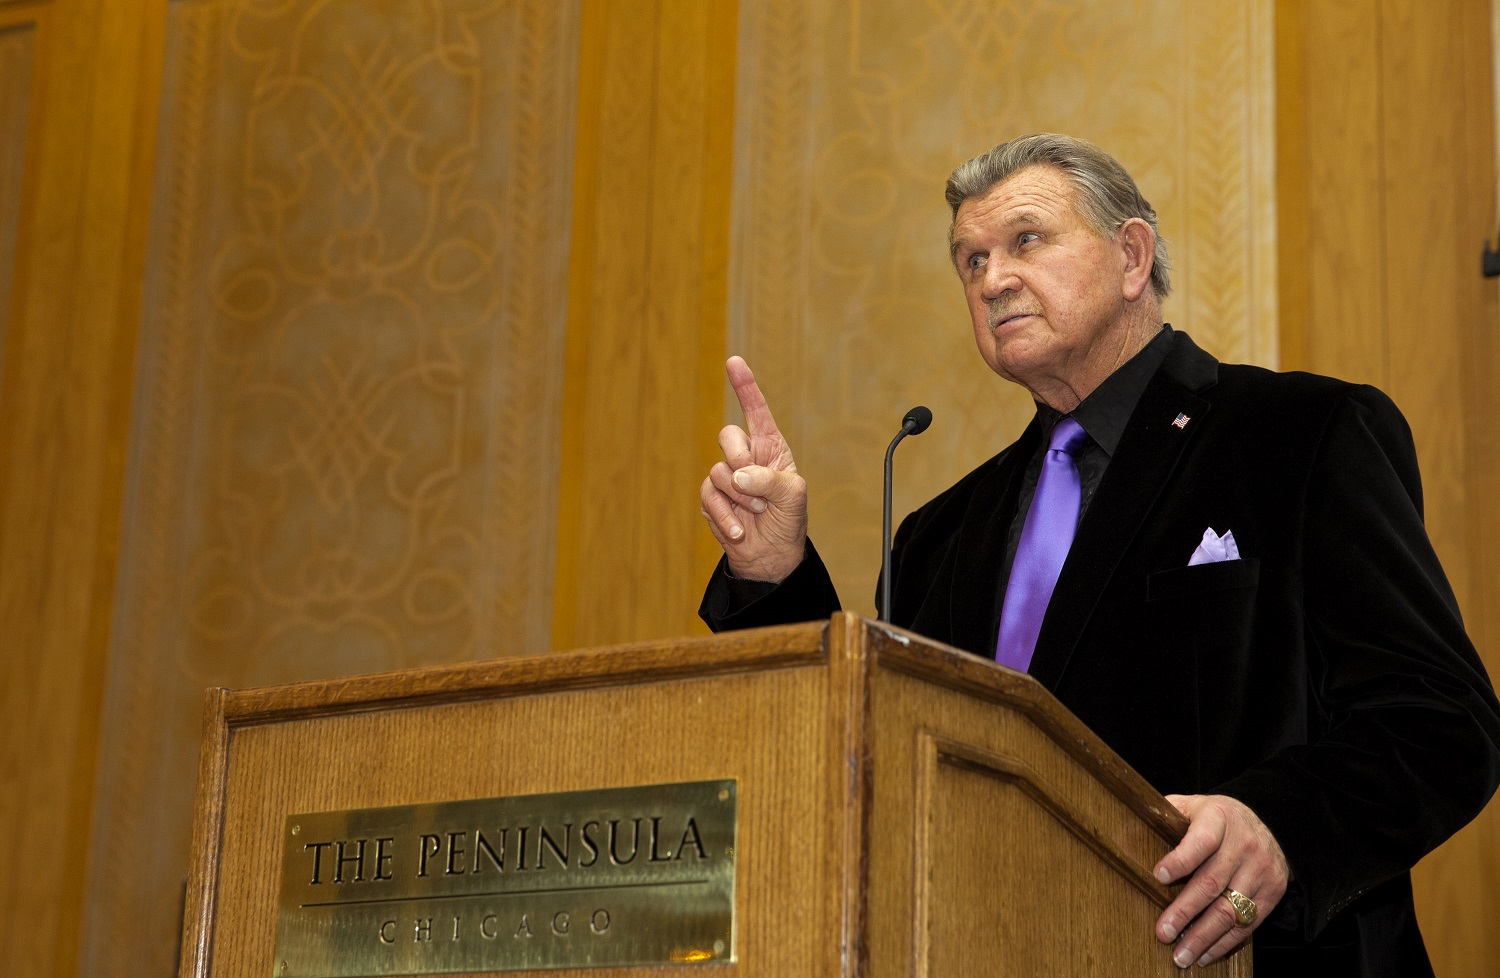 Former Chicago Bears player and coach Mike Ditka speaks at a charity dinner on Oct. 22, 2015, in Chicago.